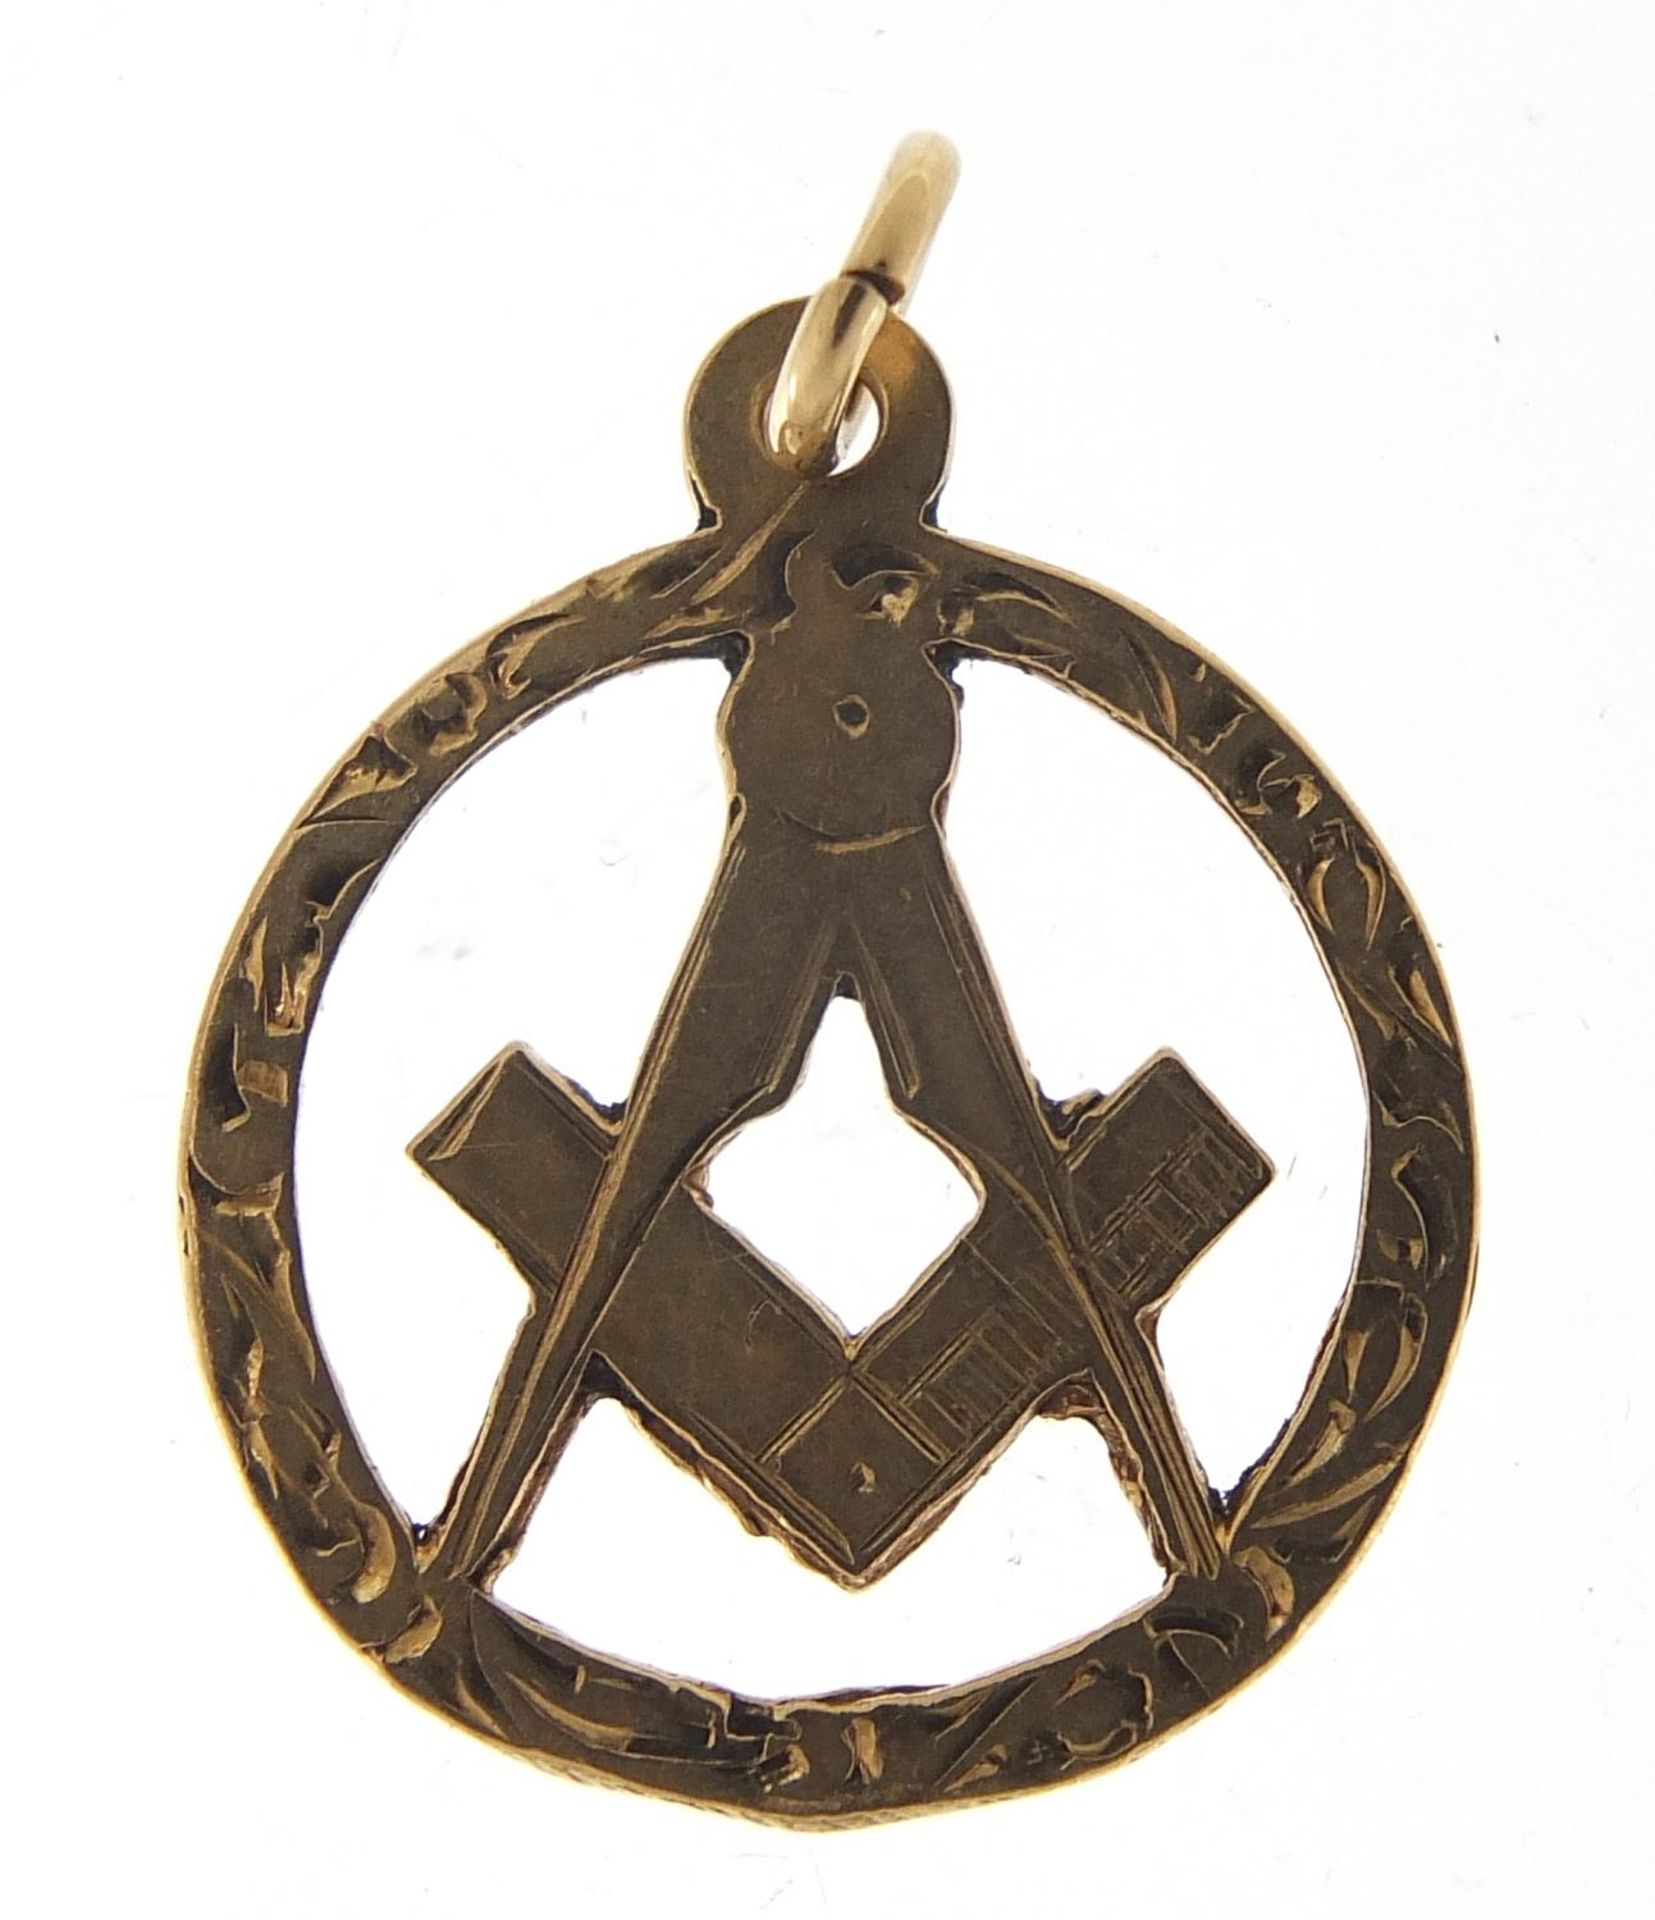 9ct gold masonic pendant, 2.2cm high, 1.7g : For Further Condition Reports Please Visit Our